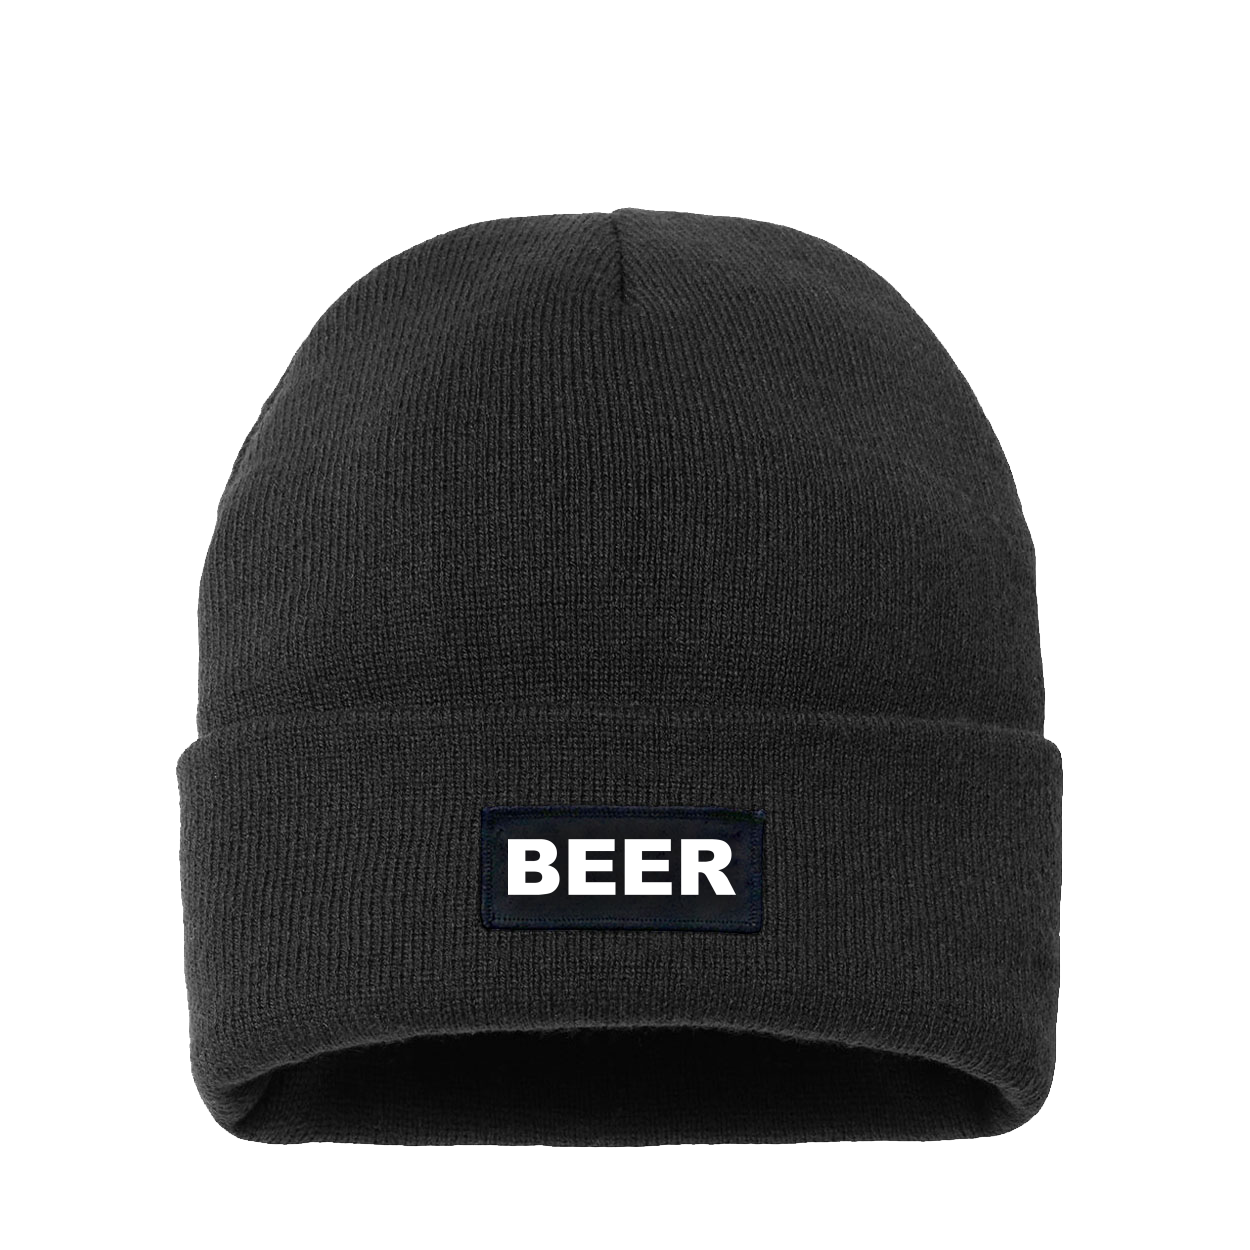 Beer Brand Logo Night Out Woven Patch Night Out Sherpa Lined Cuffed Beanie Black